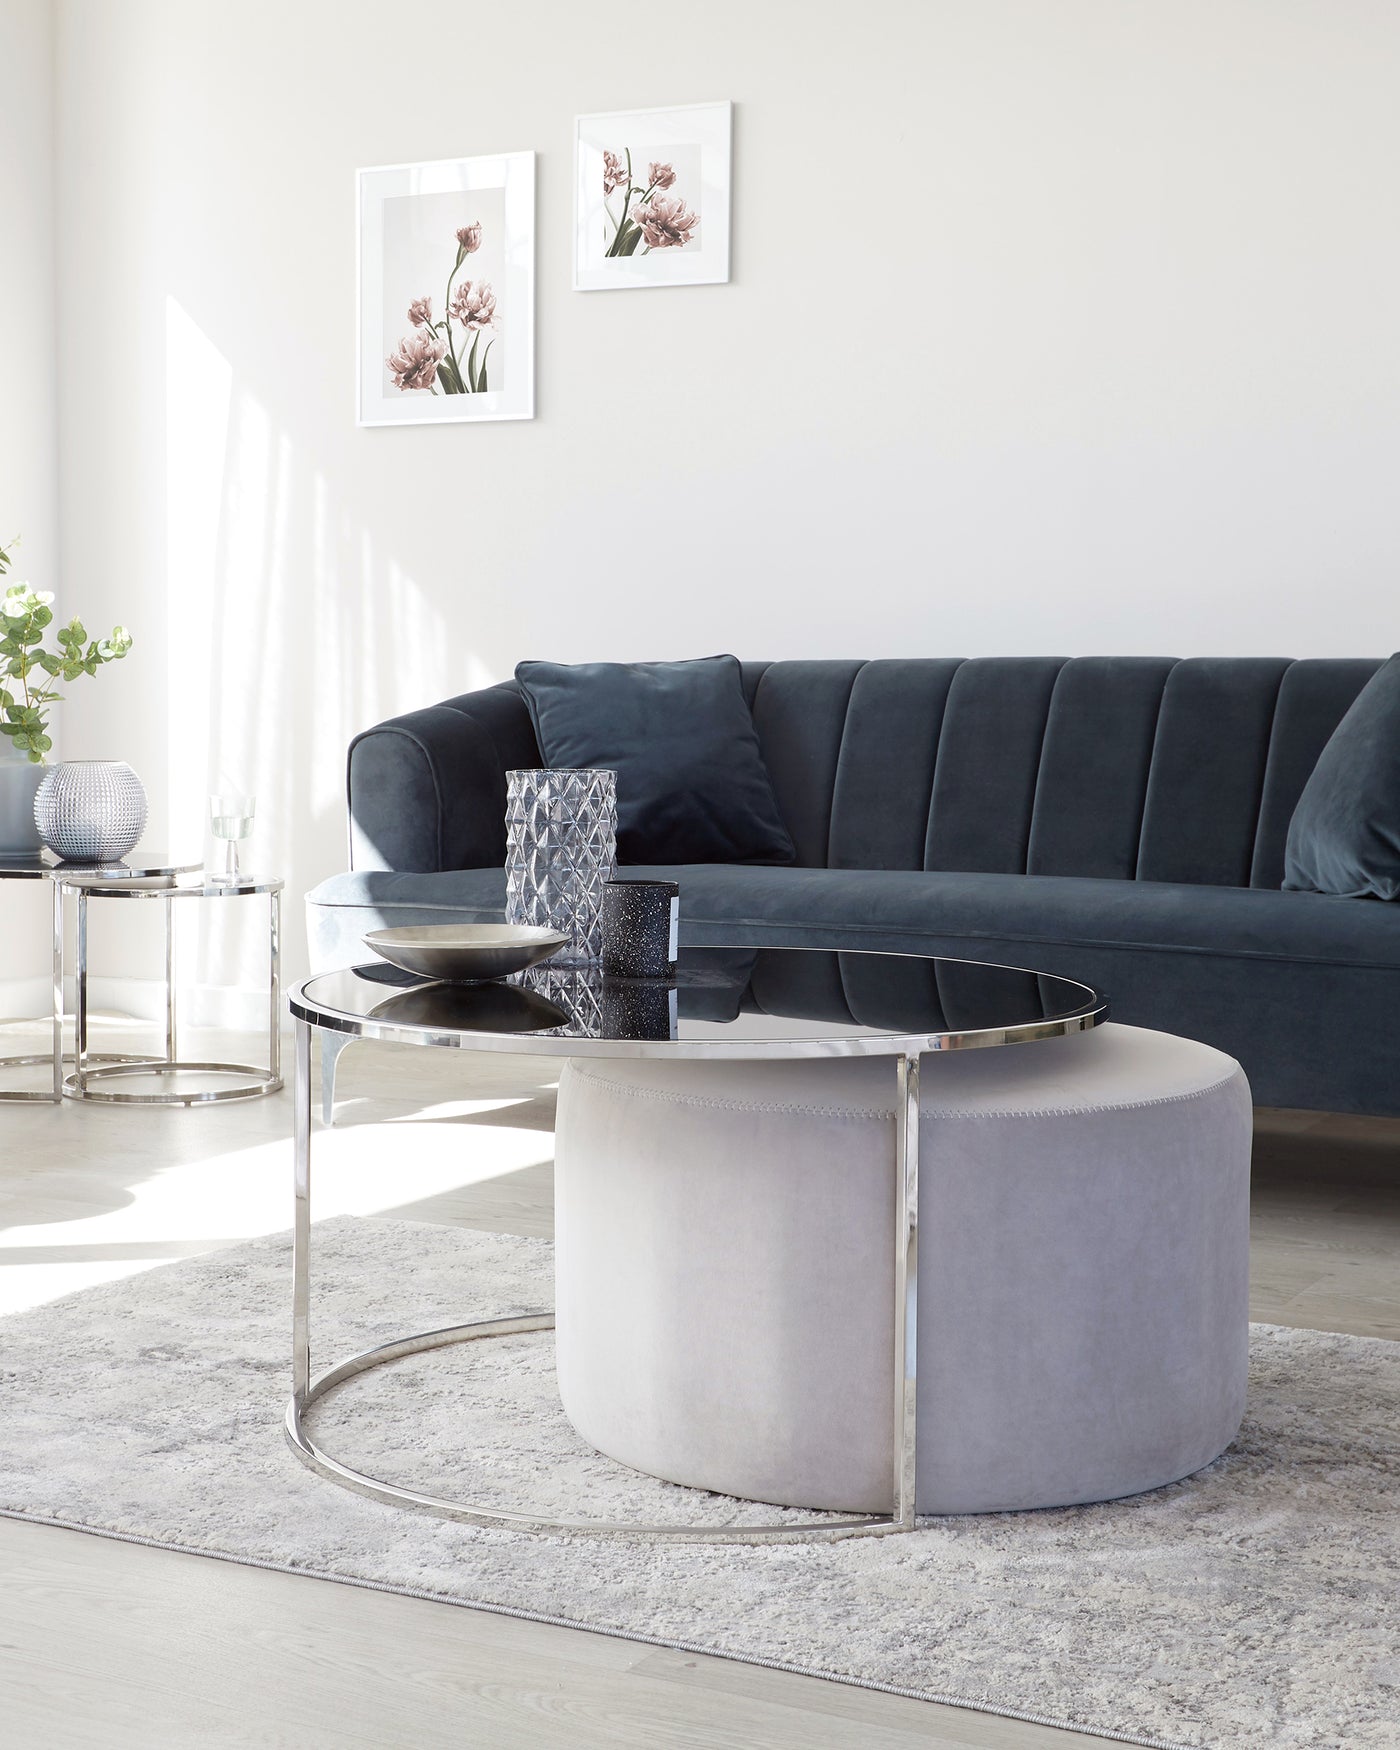 Elegant living room setup featuring a modern navy blue velvet sofa with tufted backrest, a round glass-top coffee table with a unique silver metal base, and a complementary light grey upholstered round ottoman. The room is accented with a textured light grey area rug, two framed art pieces on the wall, and a small silver side table with decorative items.